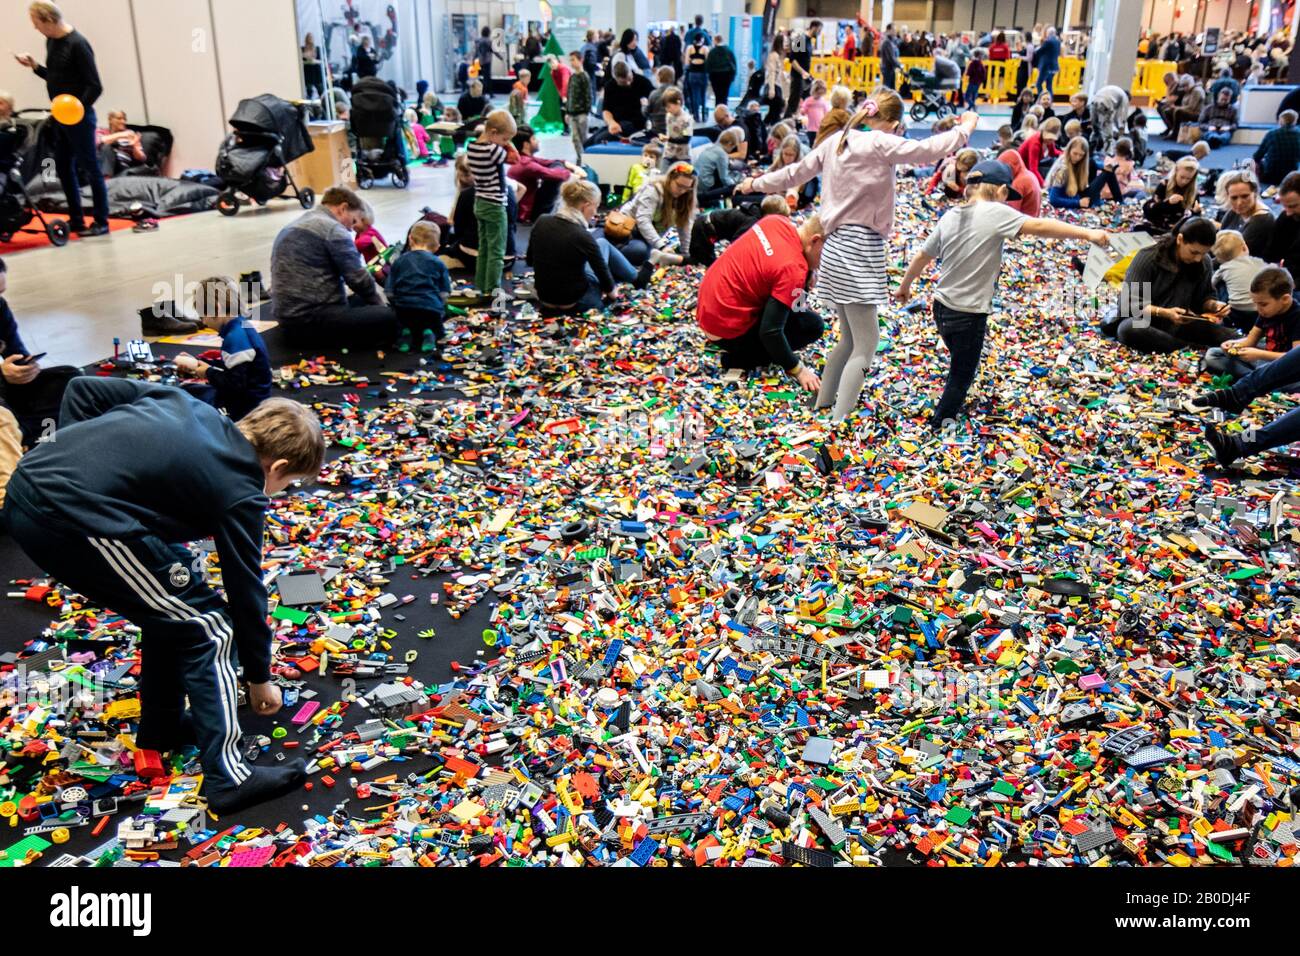 Copenhagen, Denmark. 13th Feb, 2017. Children and adults of ages go crazy at the annual LEGO World event in Bella Center Copenhagen. The LEGO Group is largest toy company